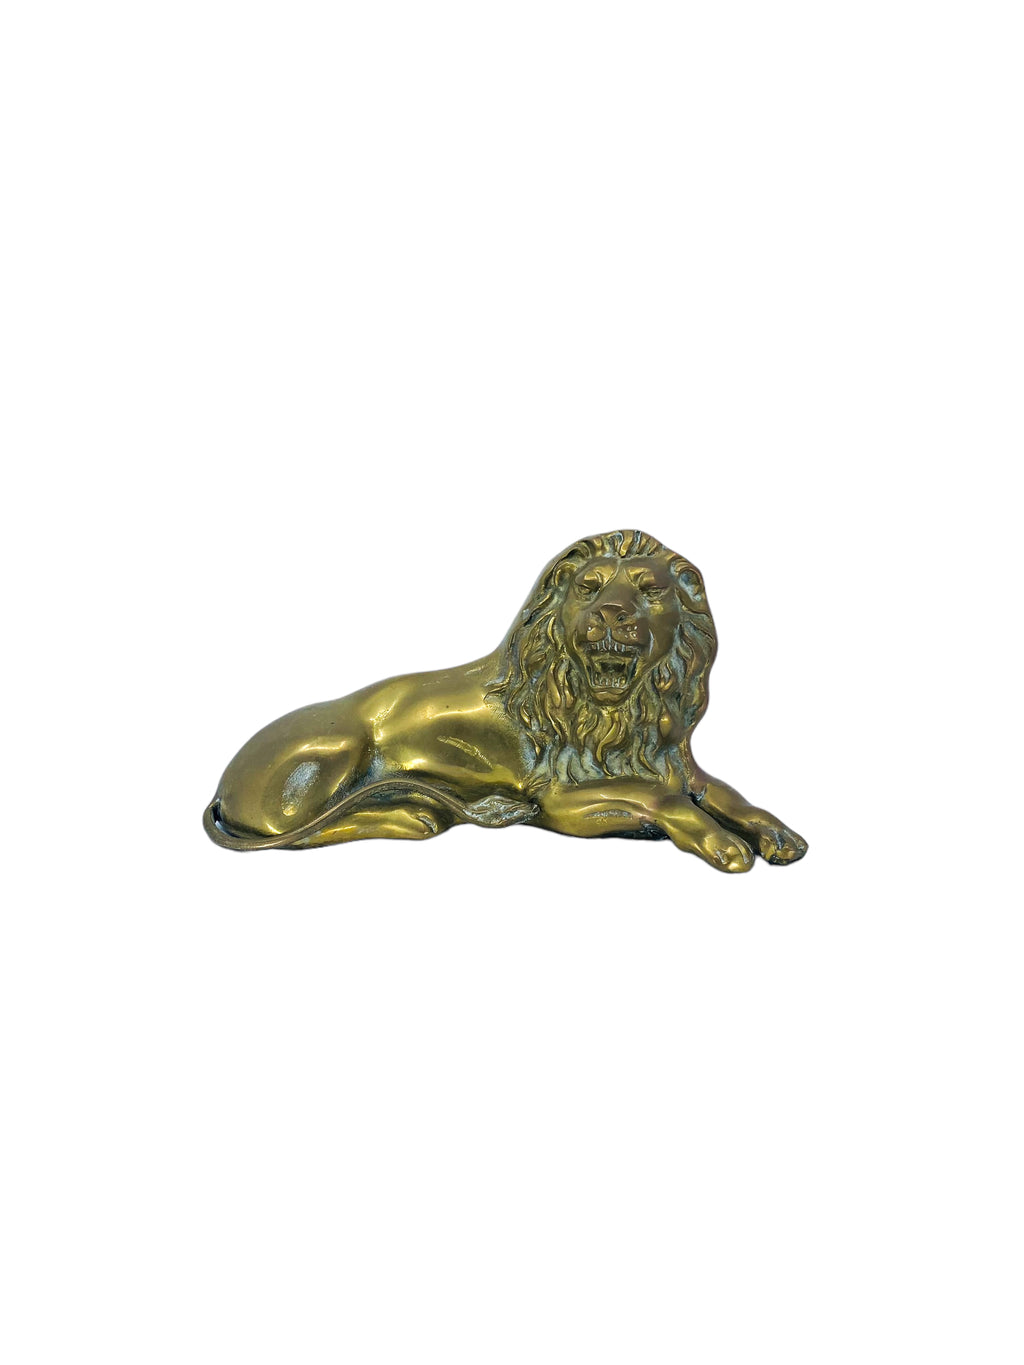 Solid Brass Laying Lion